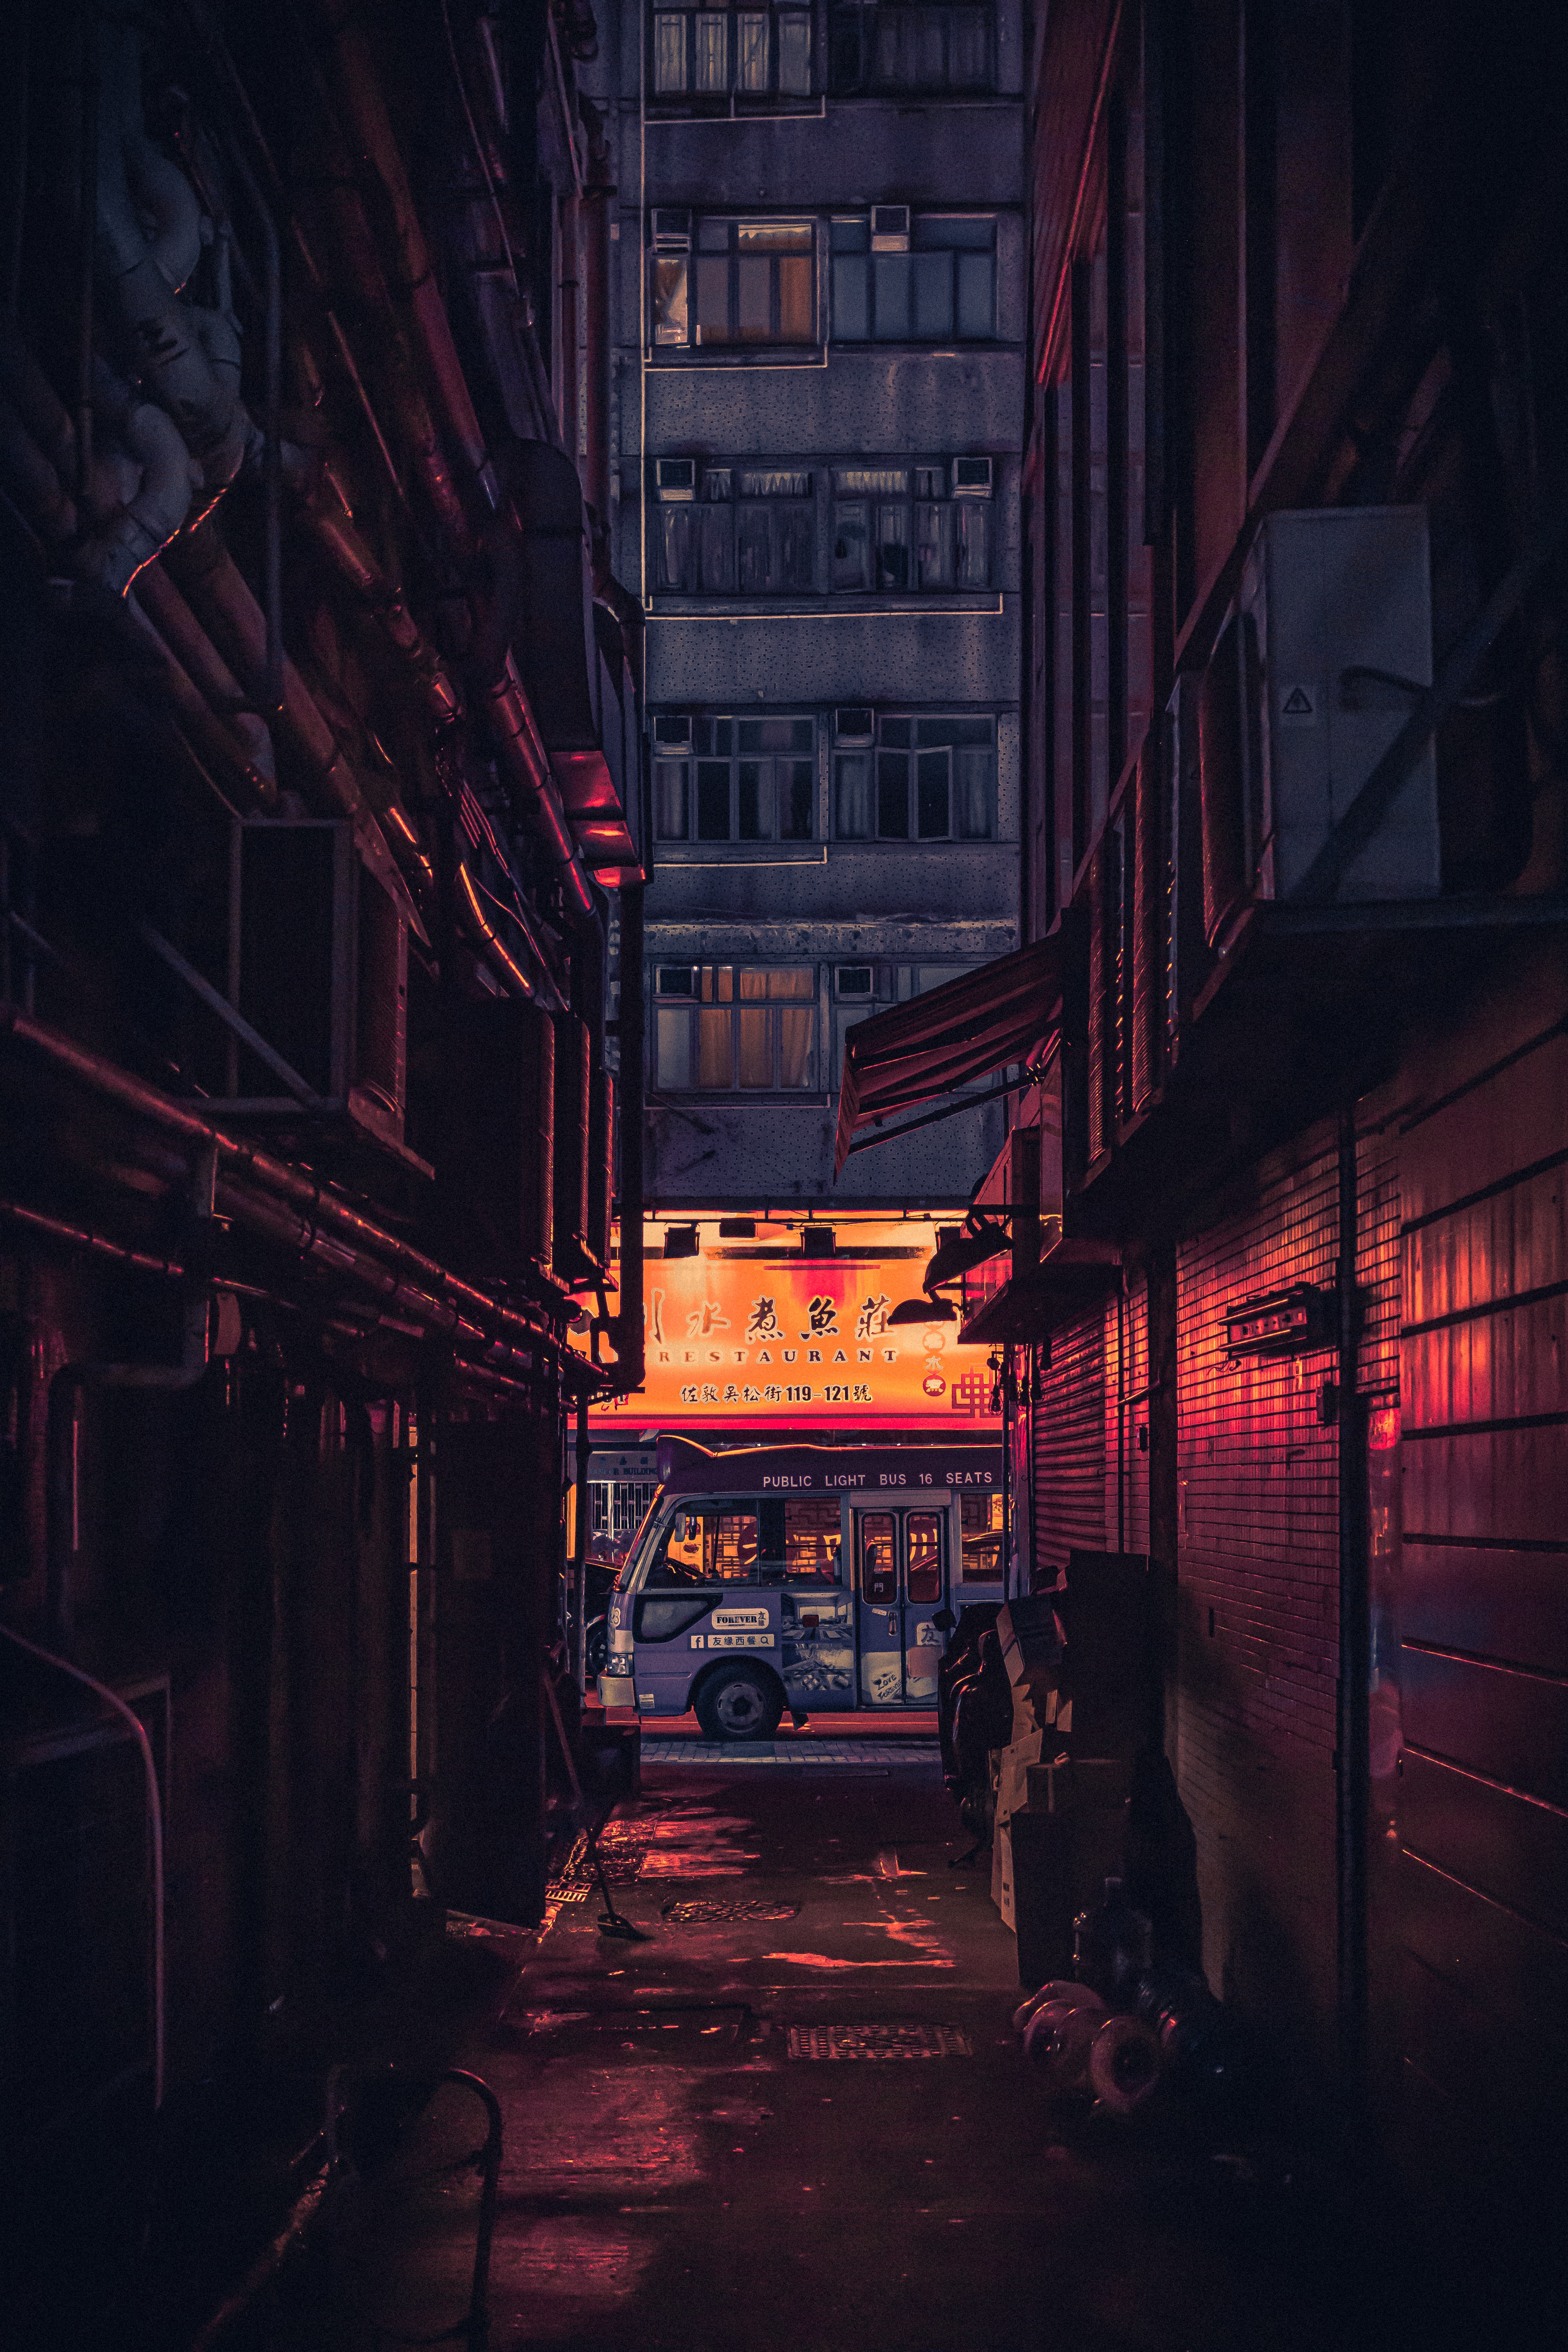 Night City Road Wallpapers